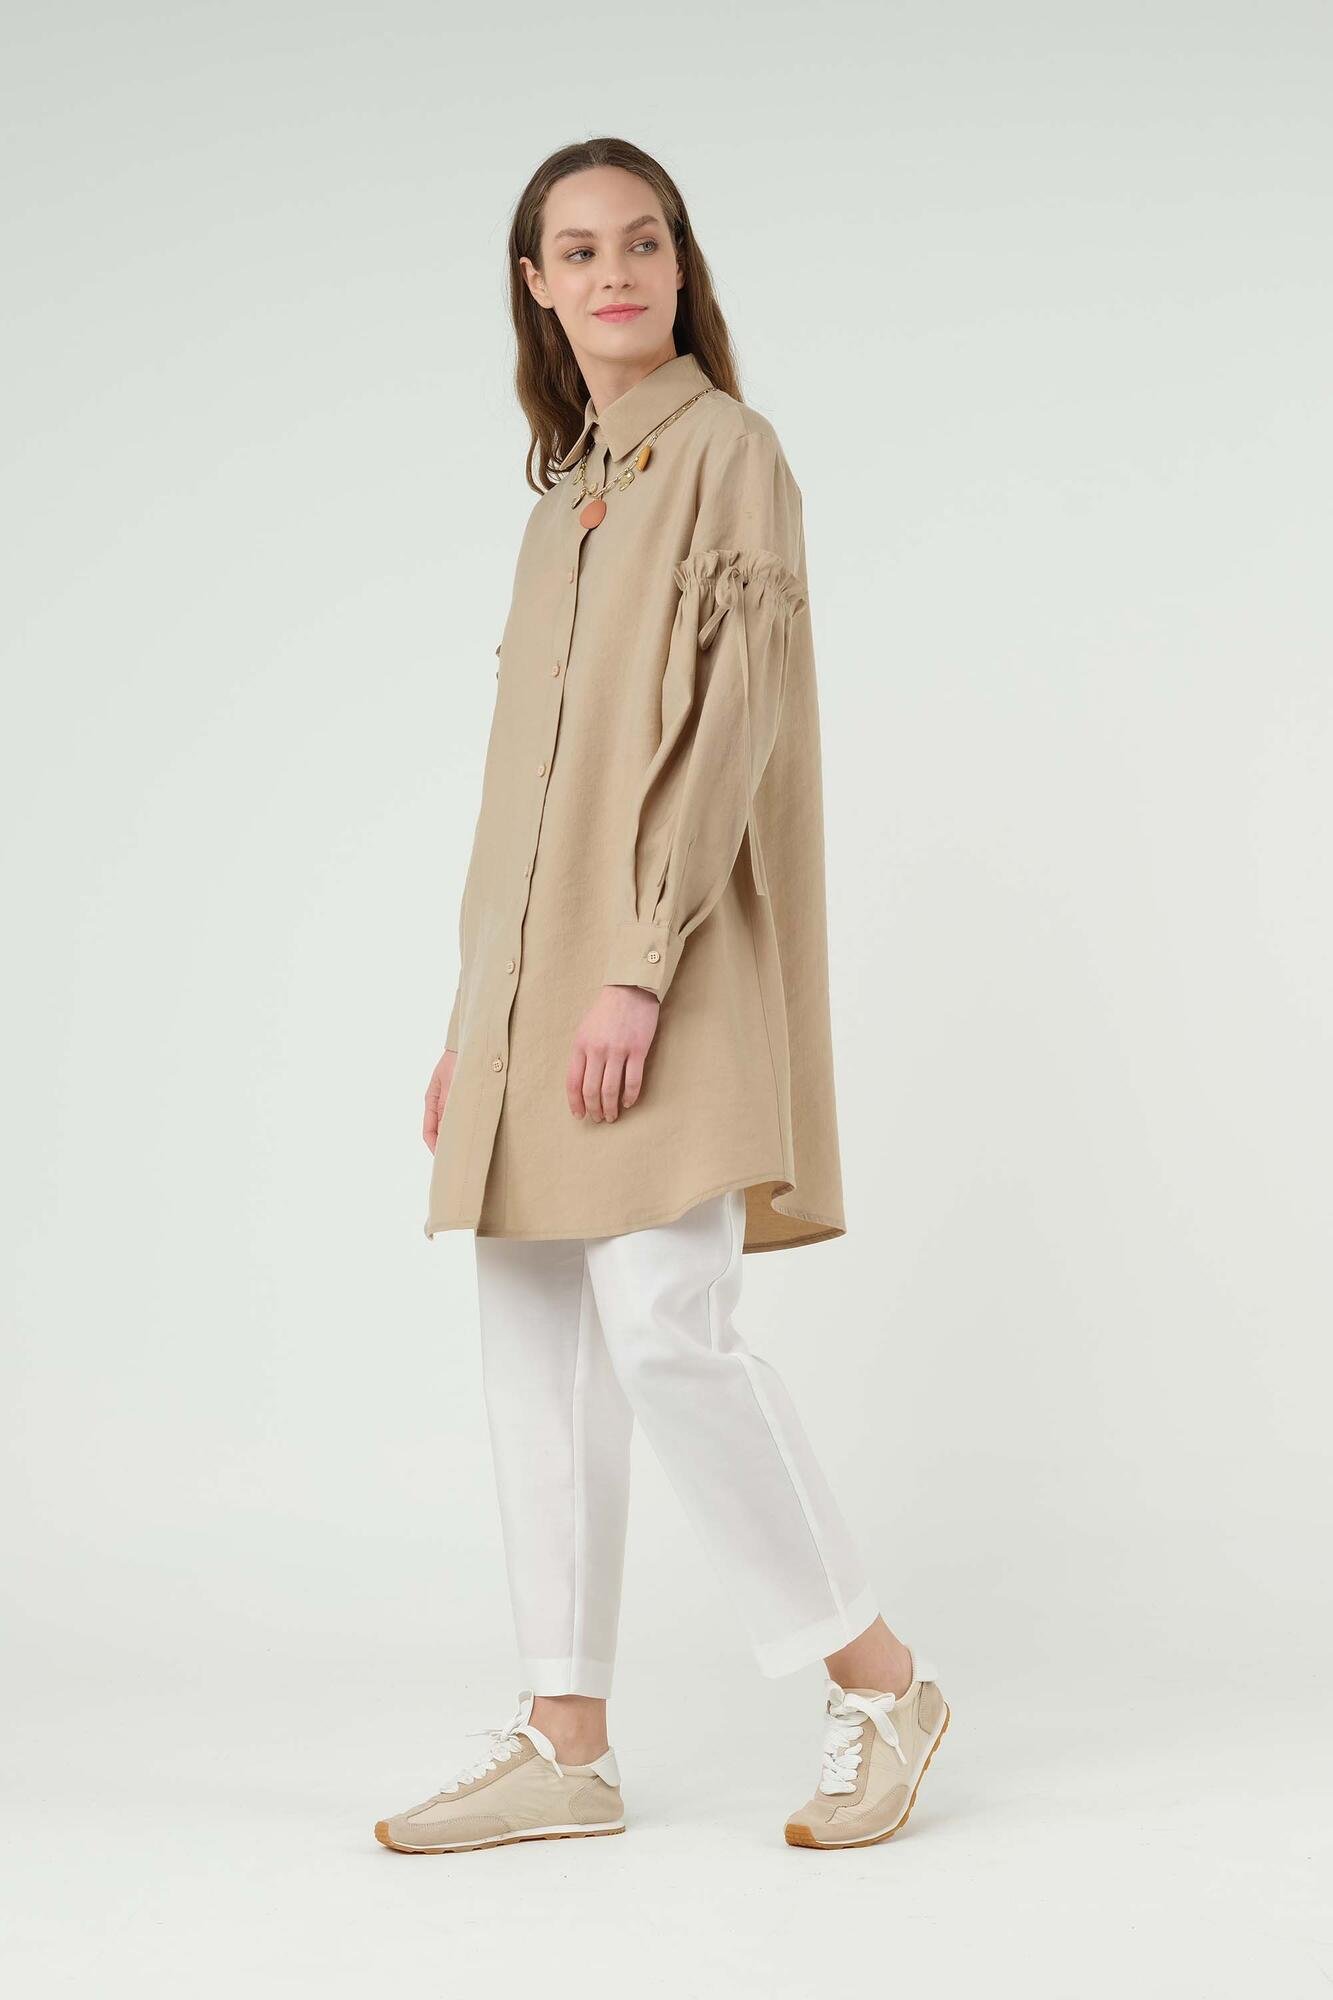 Strapped Arms Tunic Light Camel 